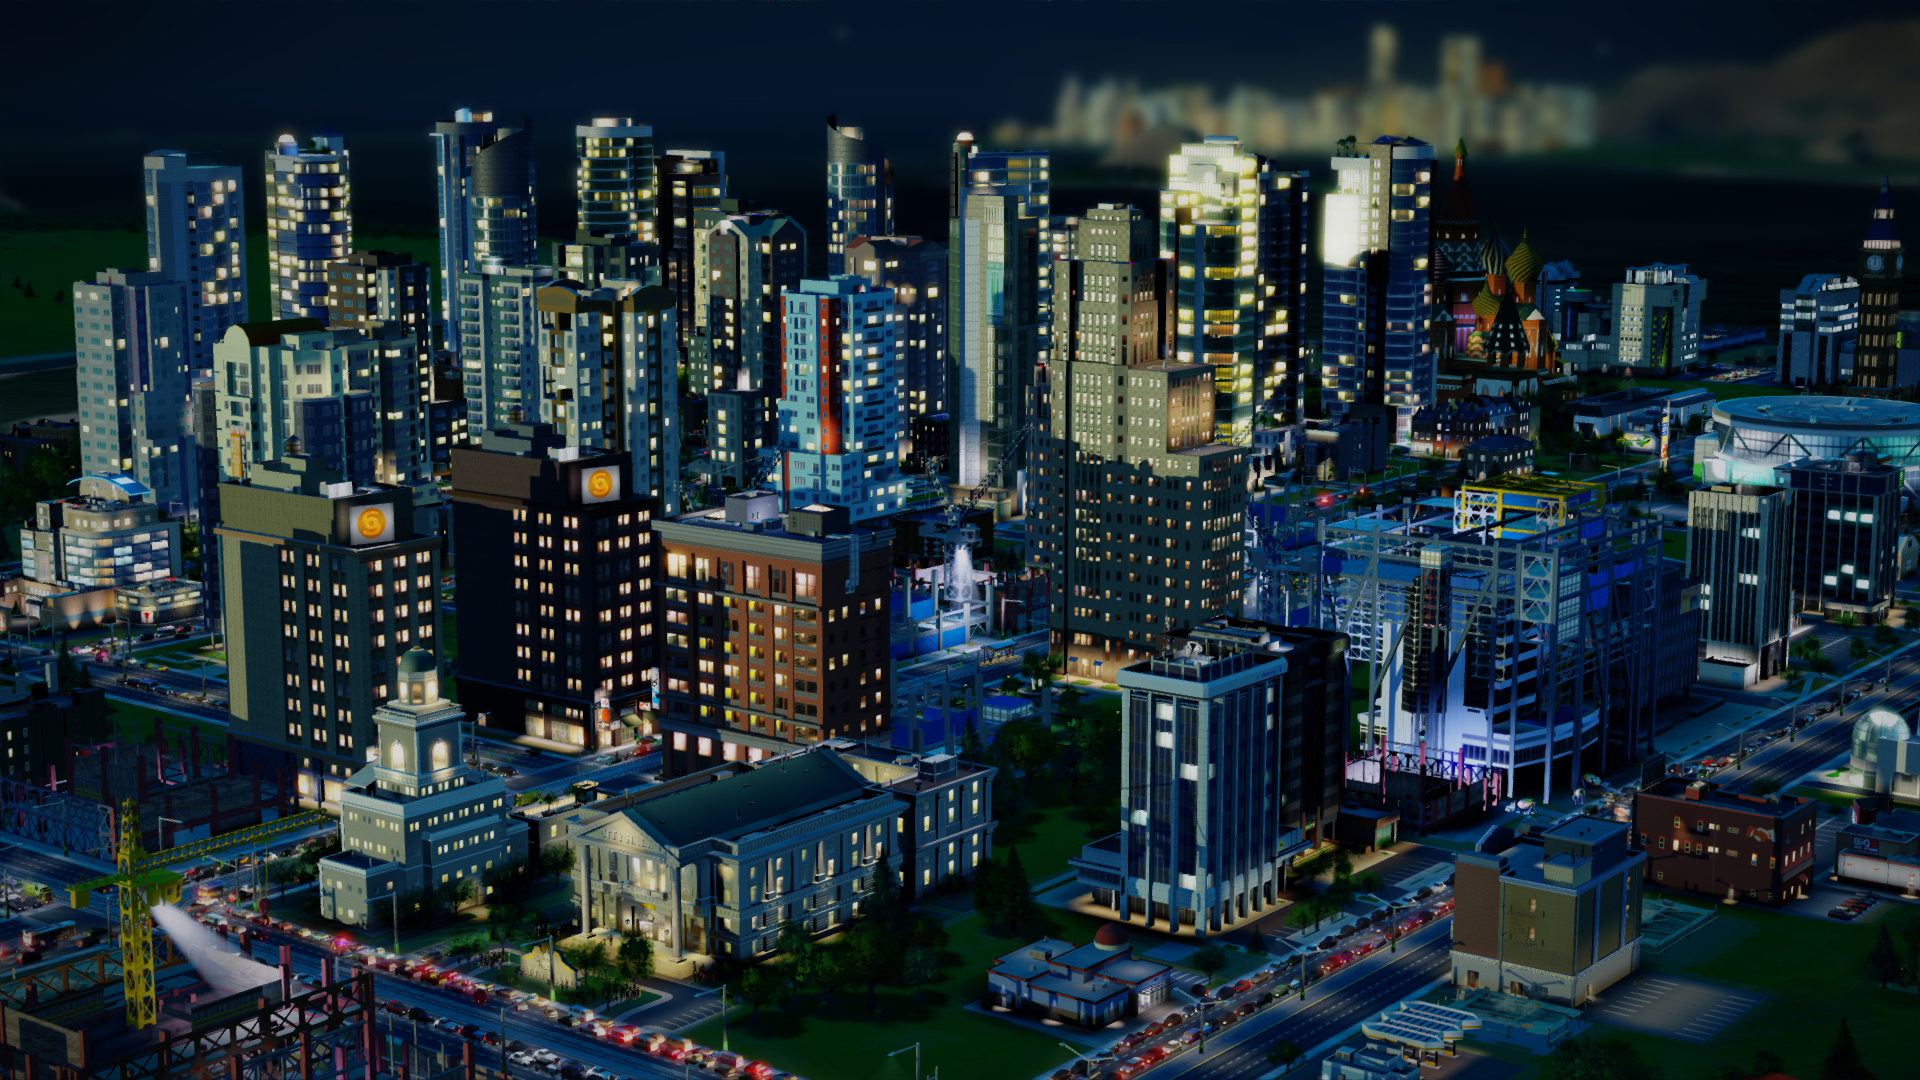 My Sims City Simcity HD Wallpaper Background Image Id